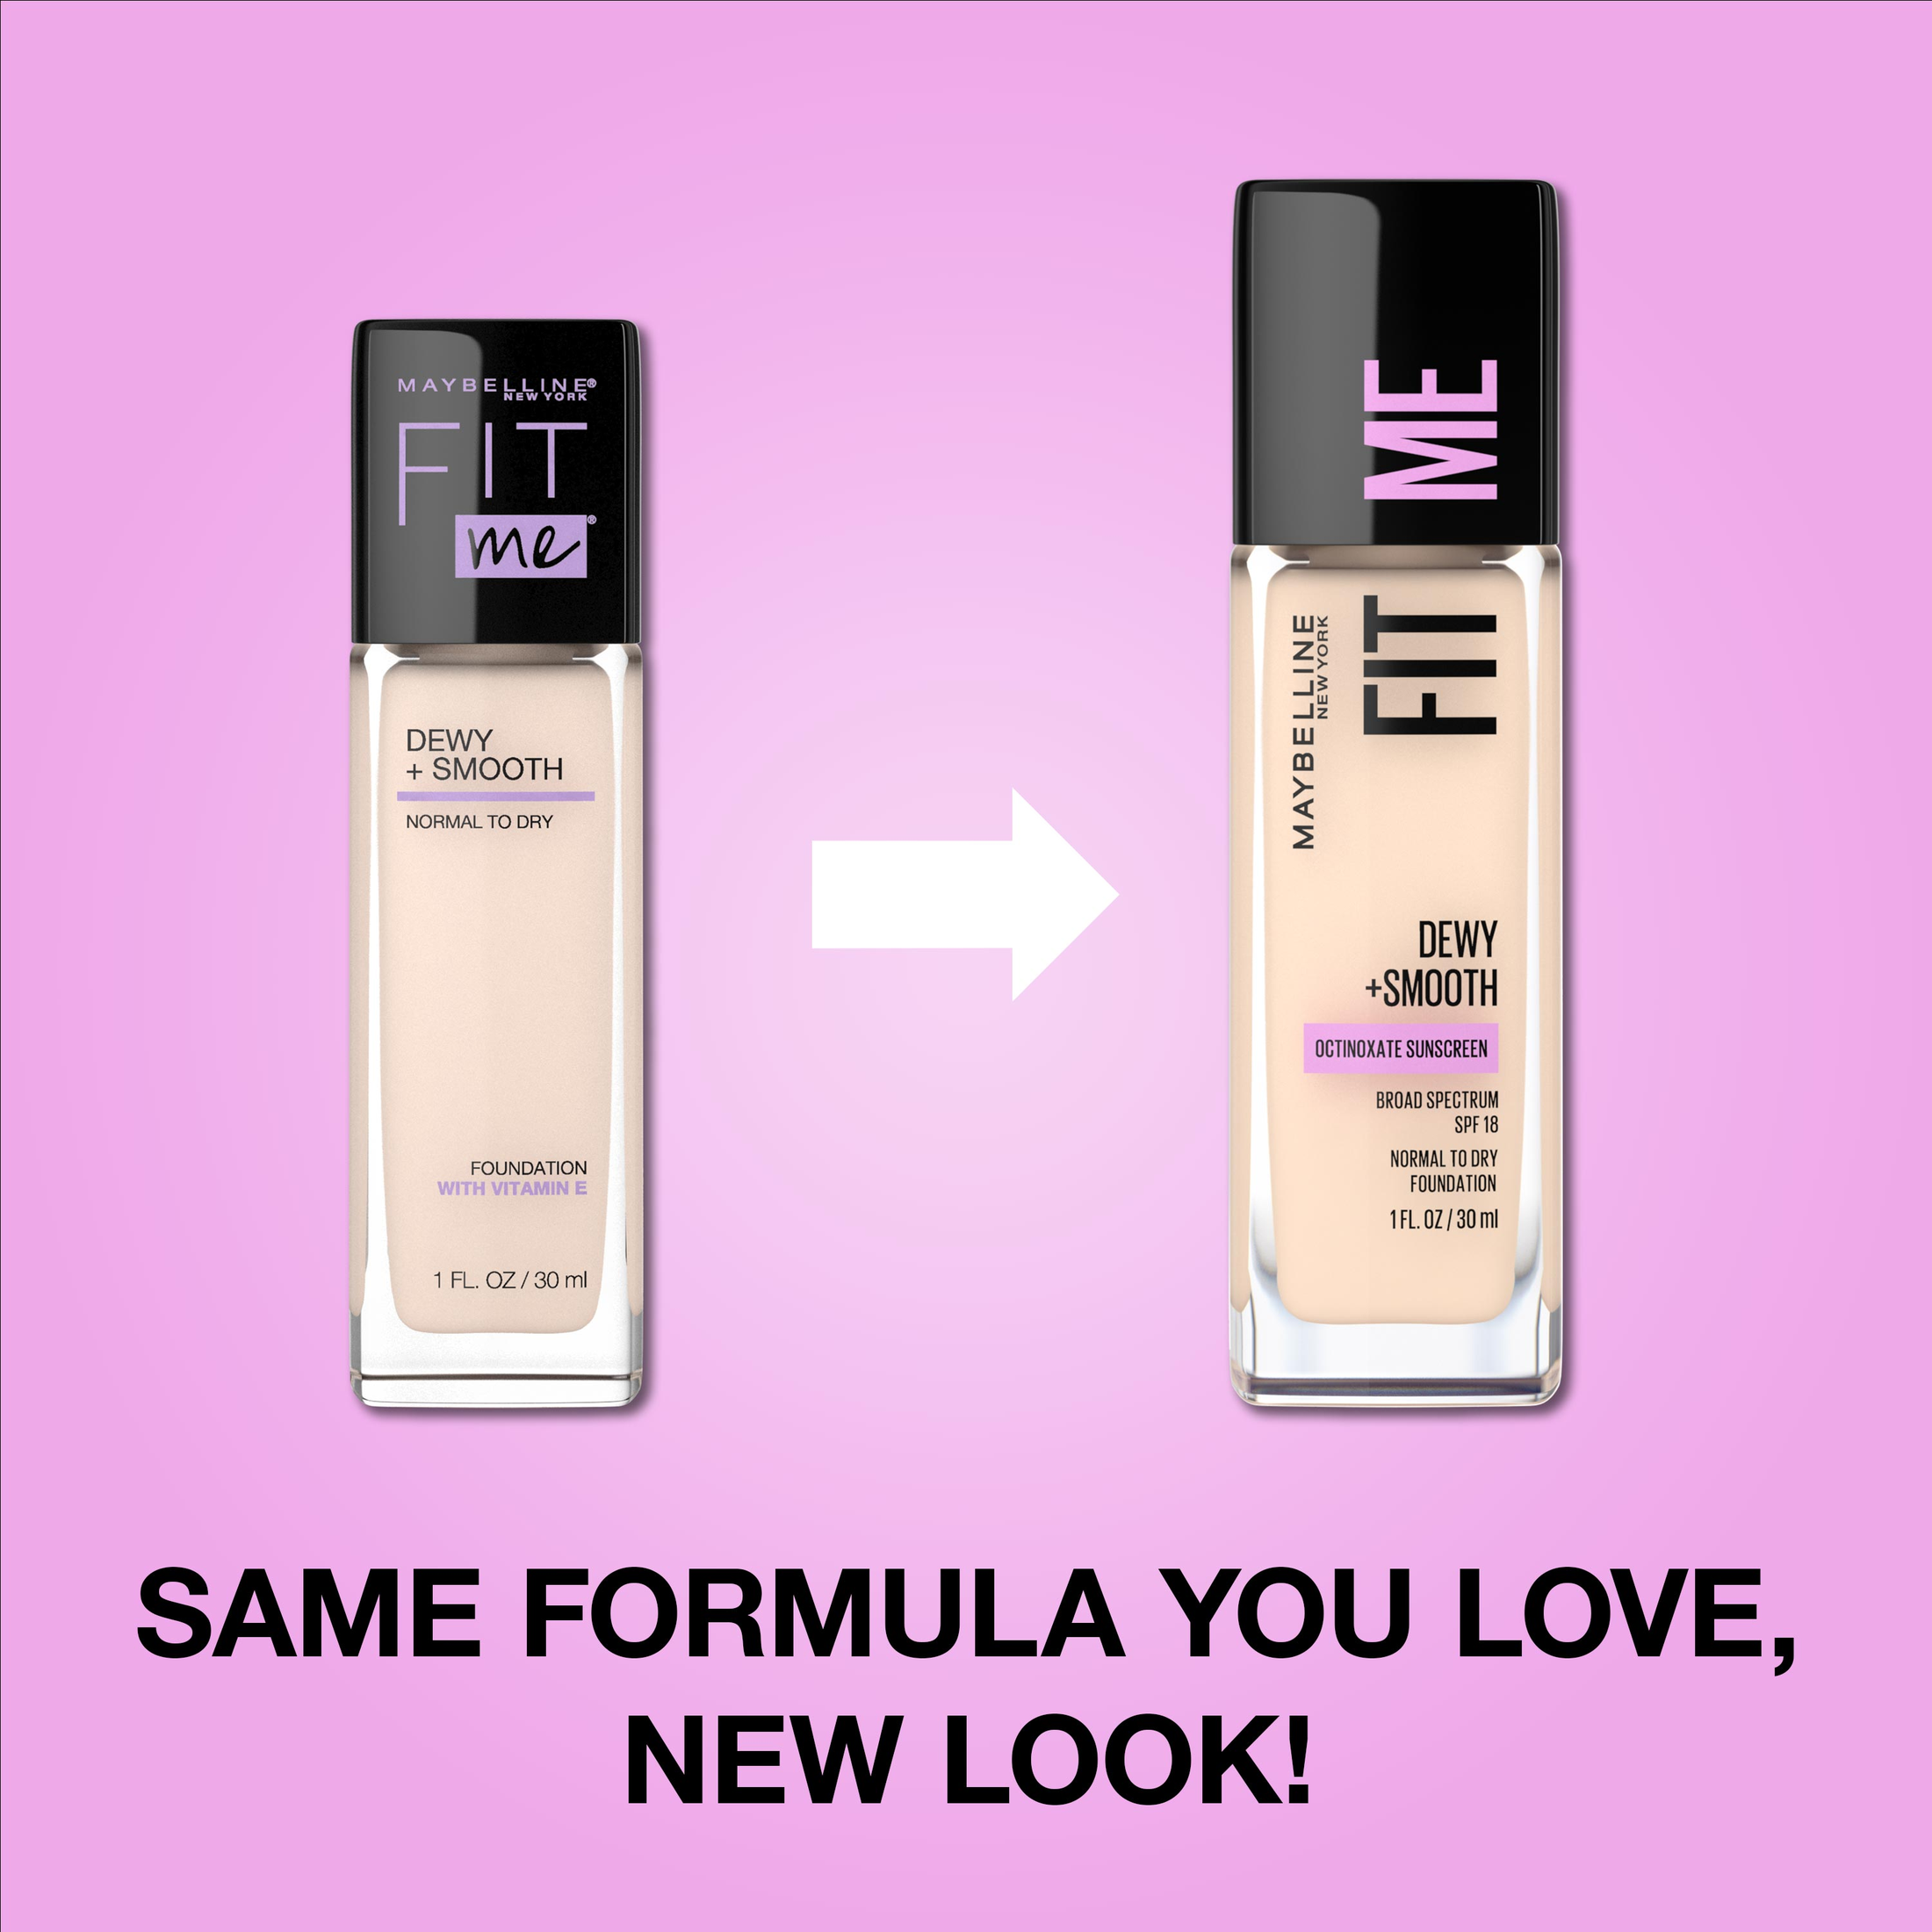 Maybelline Fit Me Dewy and Smooth Liquid Foundation, SPF 18, 102 Fair Porcelain, 1 fl oz - image 3 of 9